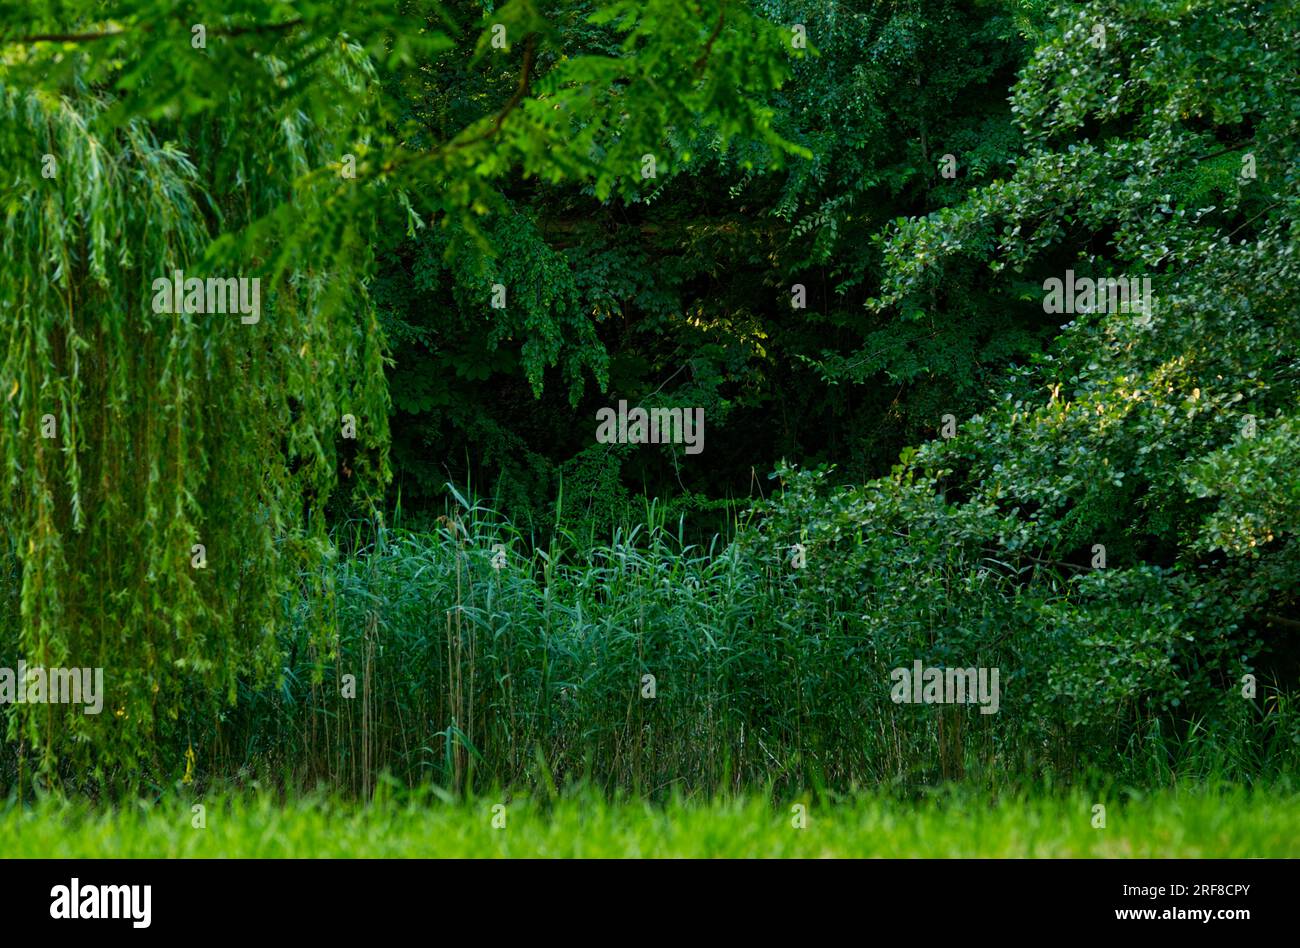 A view at a very green scenery through grass, trees and bushes at a pond Stock Photo